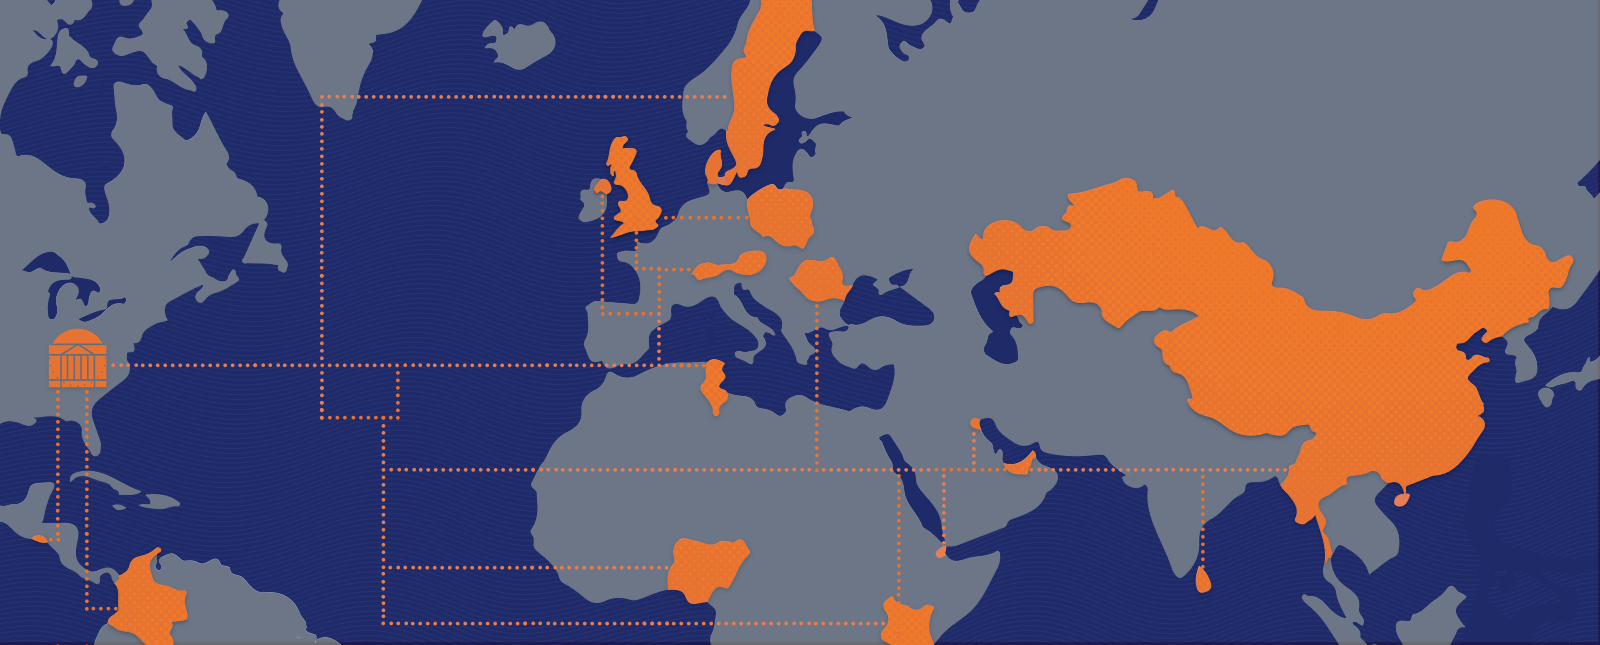 Illustration of the world with certain countries in orange and dotted orange lines connecting them all